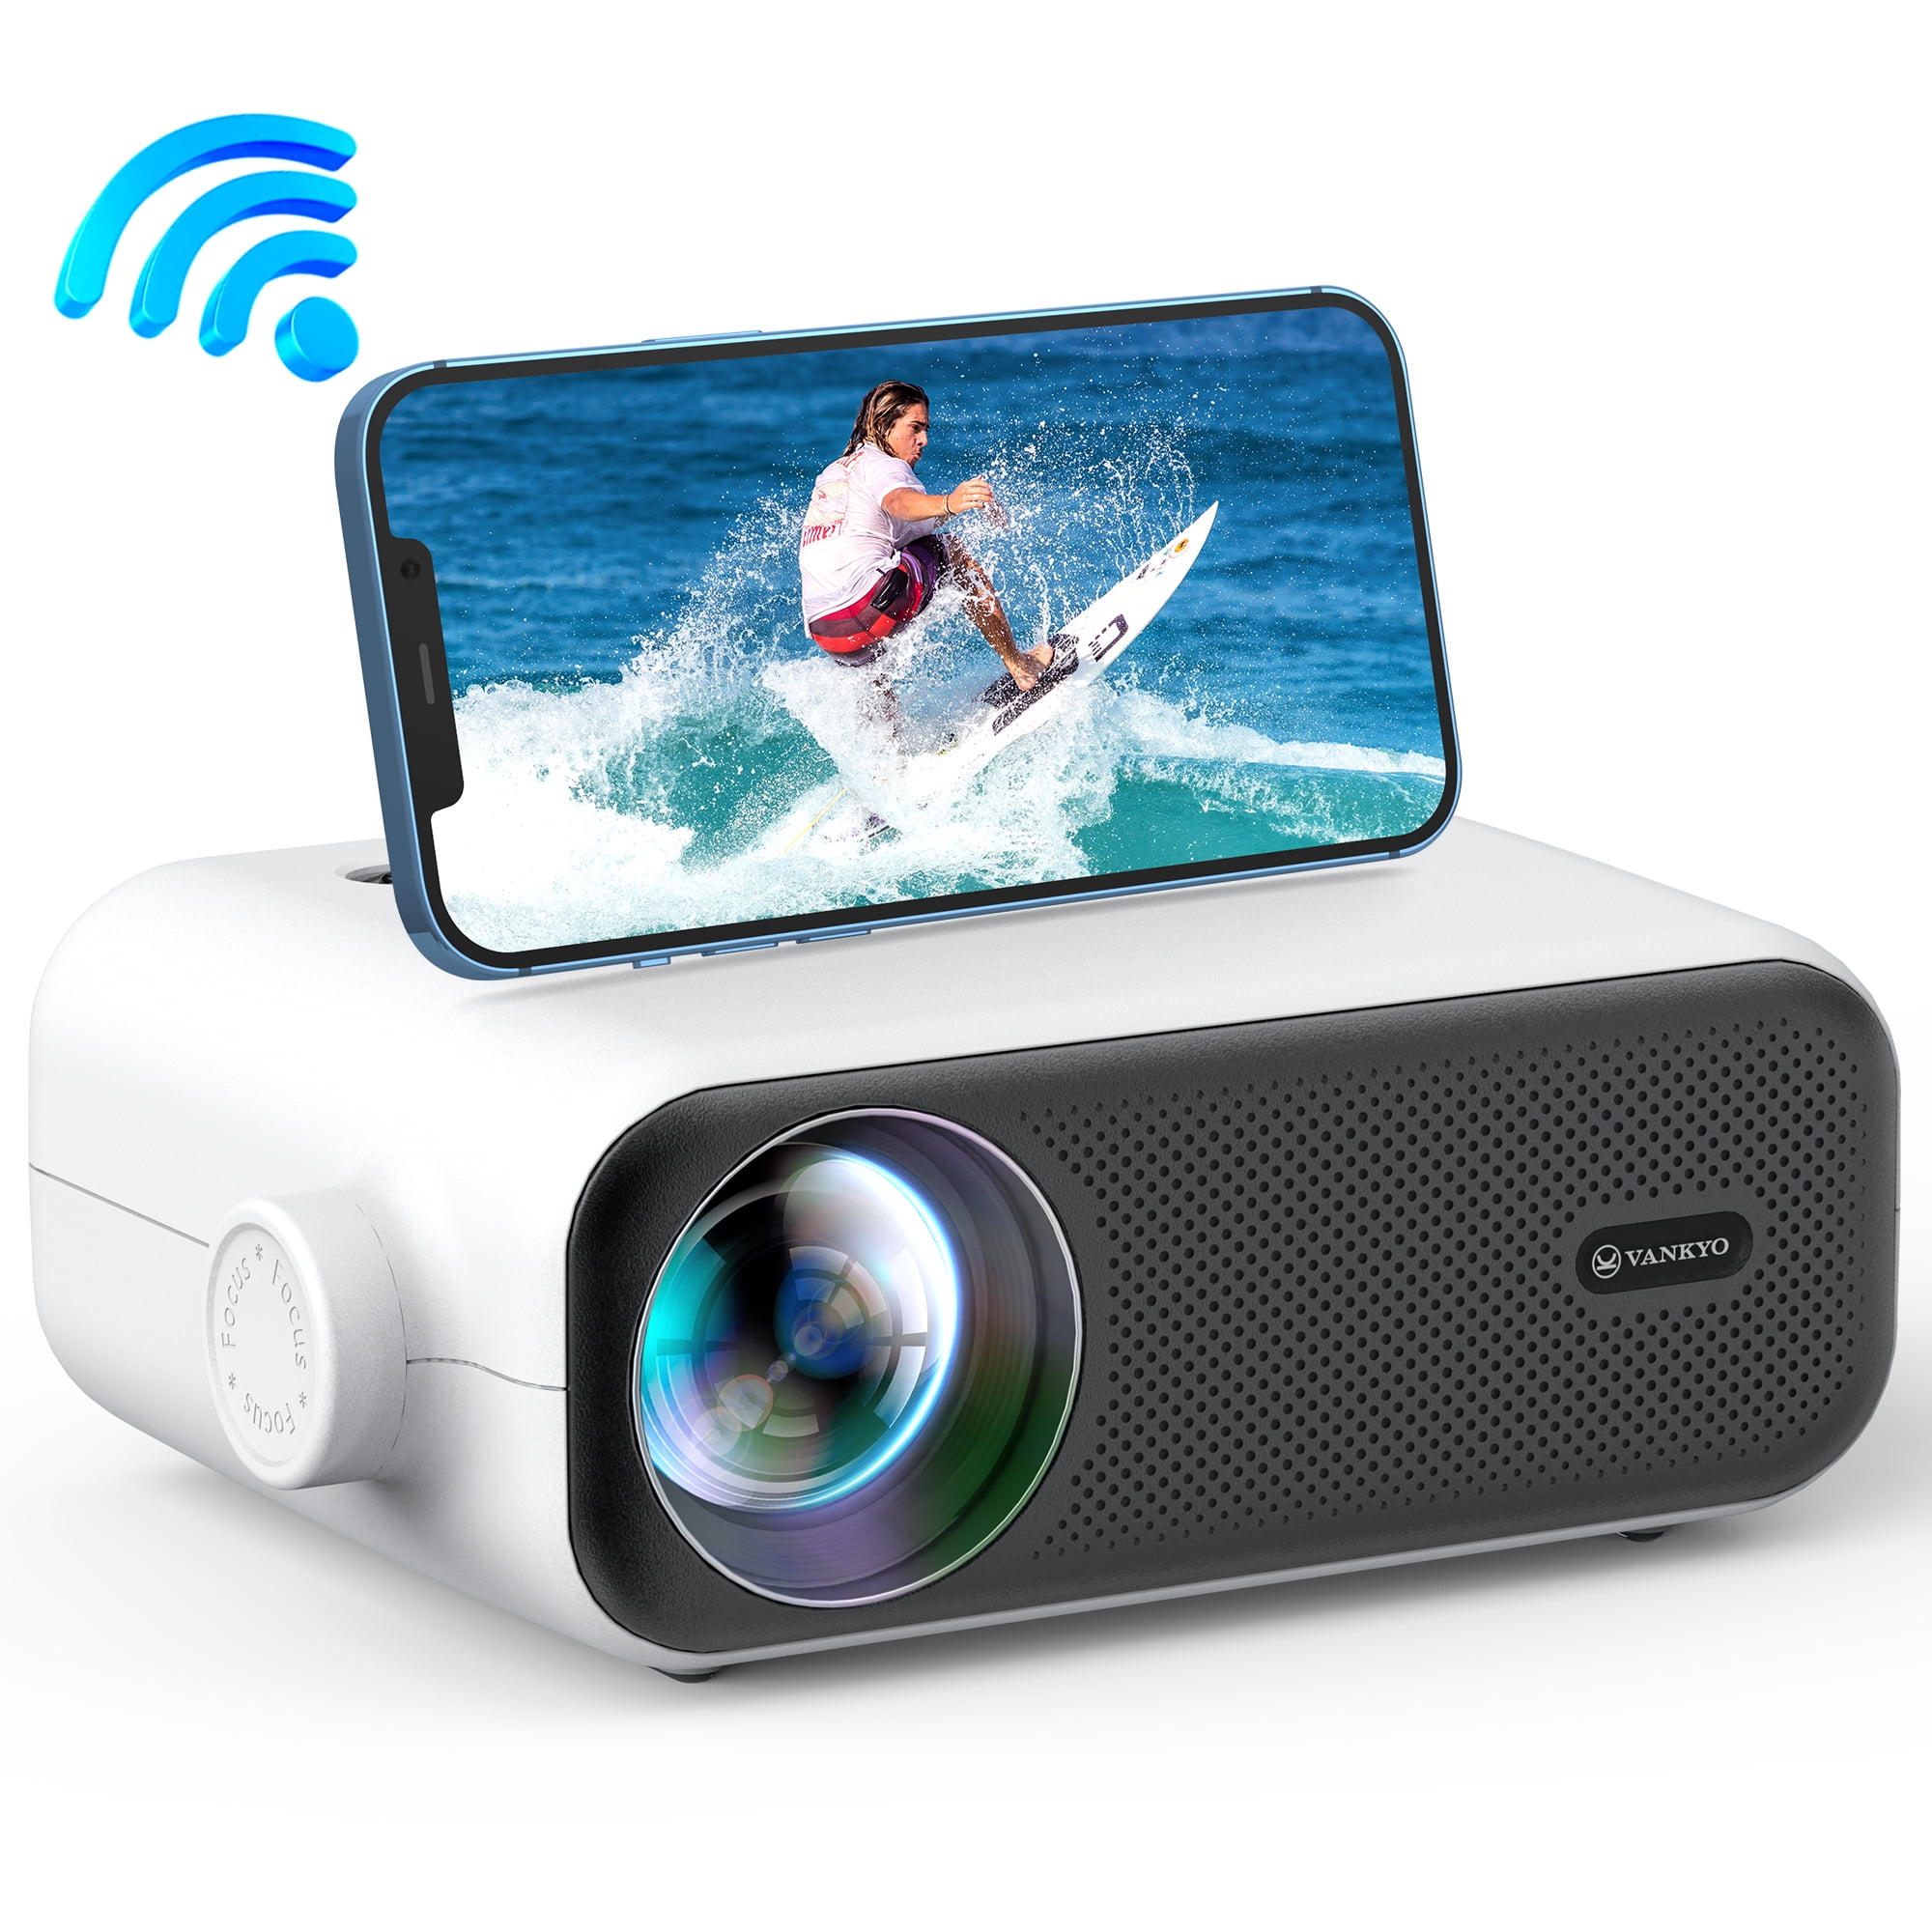 Overlegenhed Microbe skuffet VANKYO Leisure 330W WiFi Mini Projector, Full HD 1080P supported LCD Movie  Projector, 211" Projection Size Portable Video Porjector, Compatible with  TV Stick, HDMI, USB, iOS & Android - Walmart.com